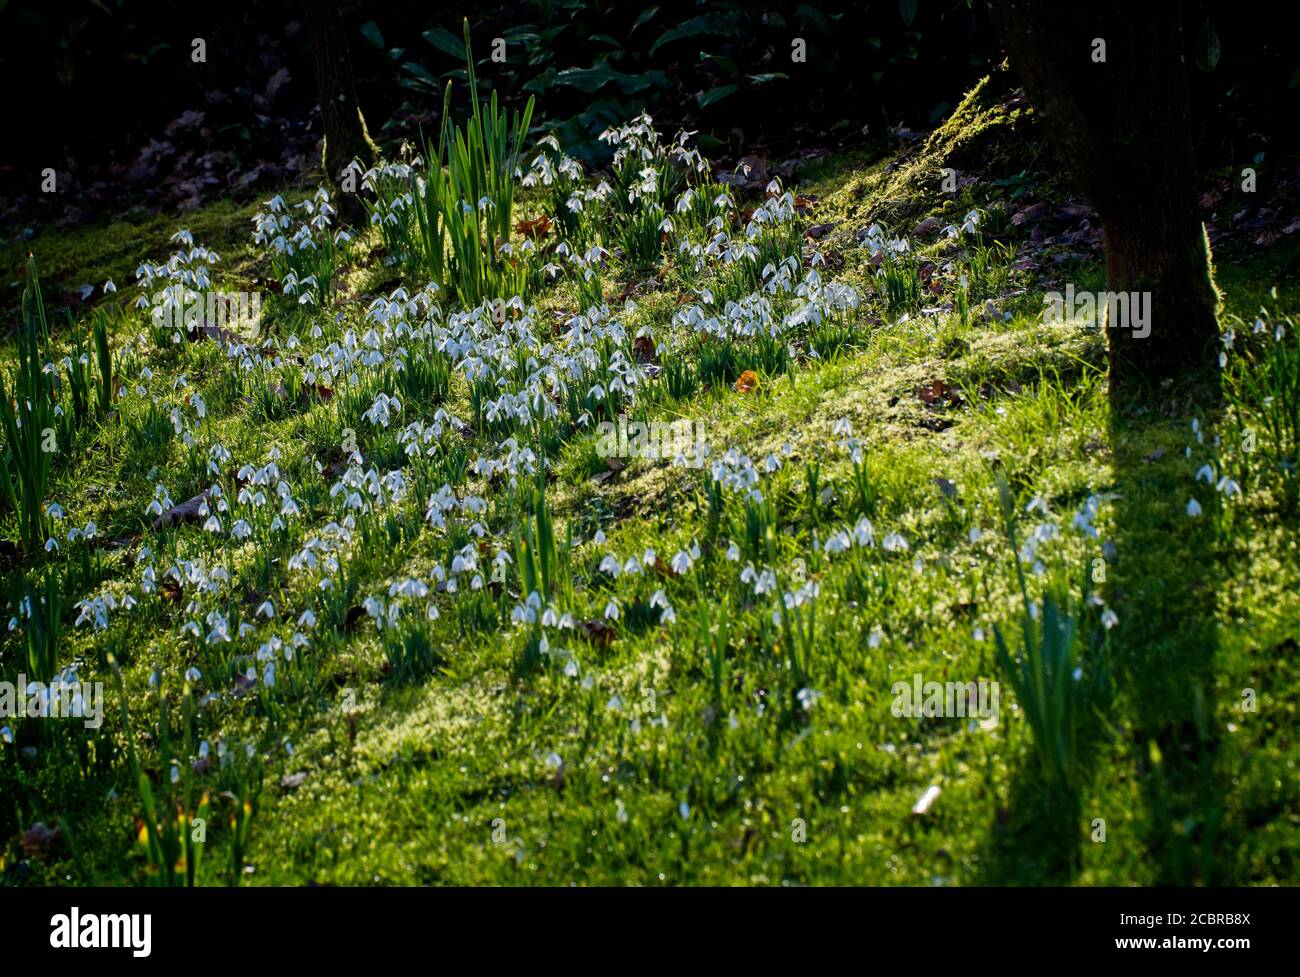 Snowdrops flowering in February, early spring in Southern England. Stock Photo